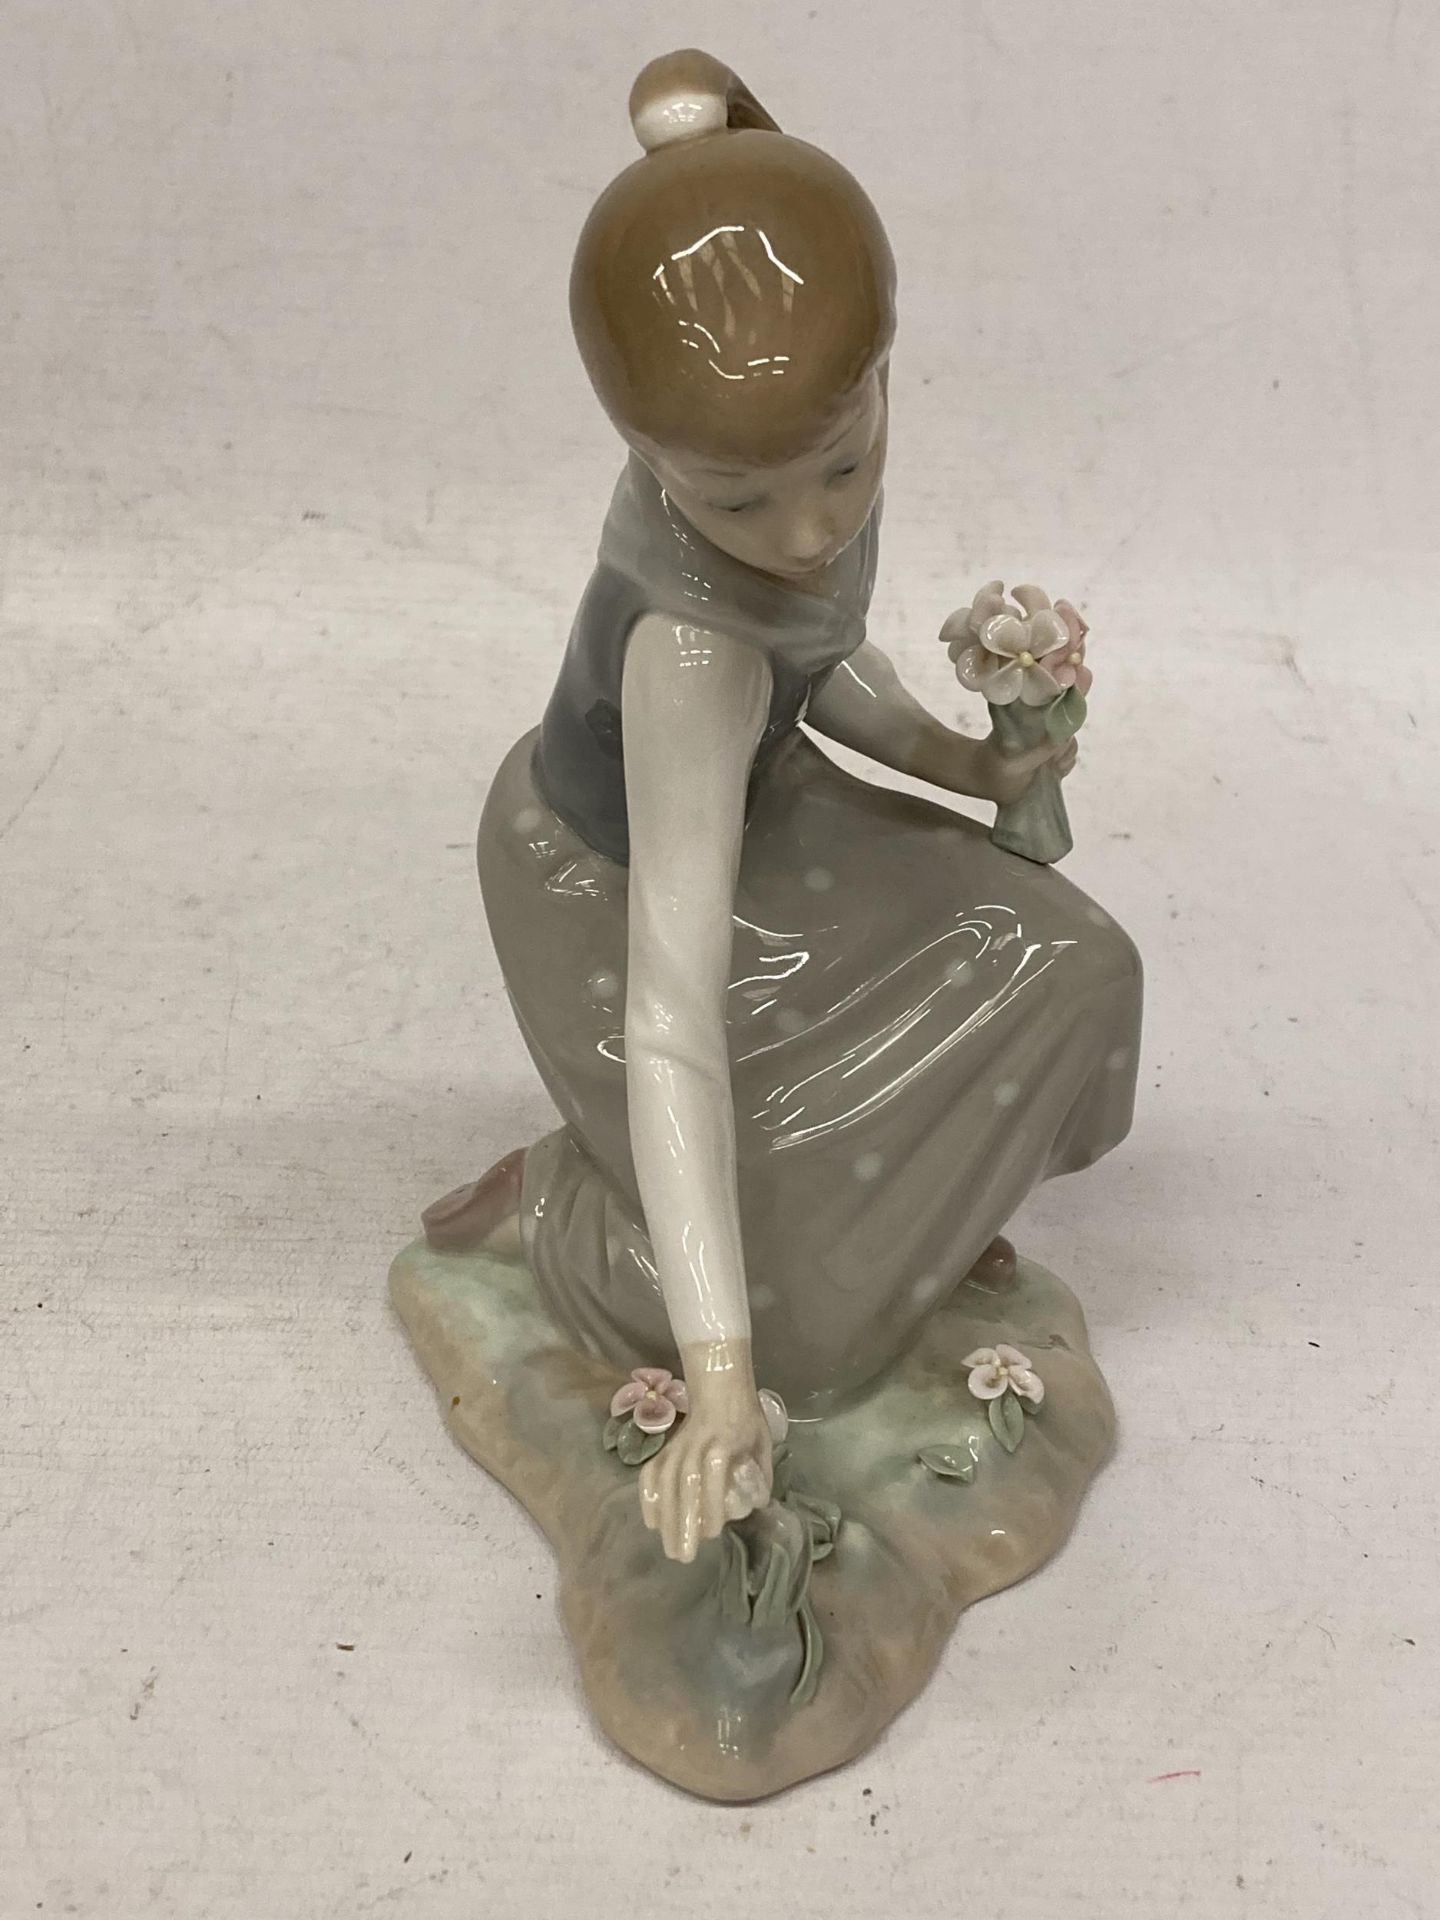 A LLADRO FIGURE OF A GIRL WITH FLOWERS - Image 2 of 4